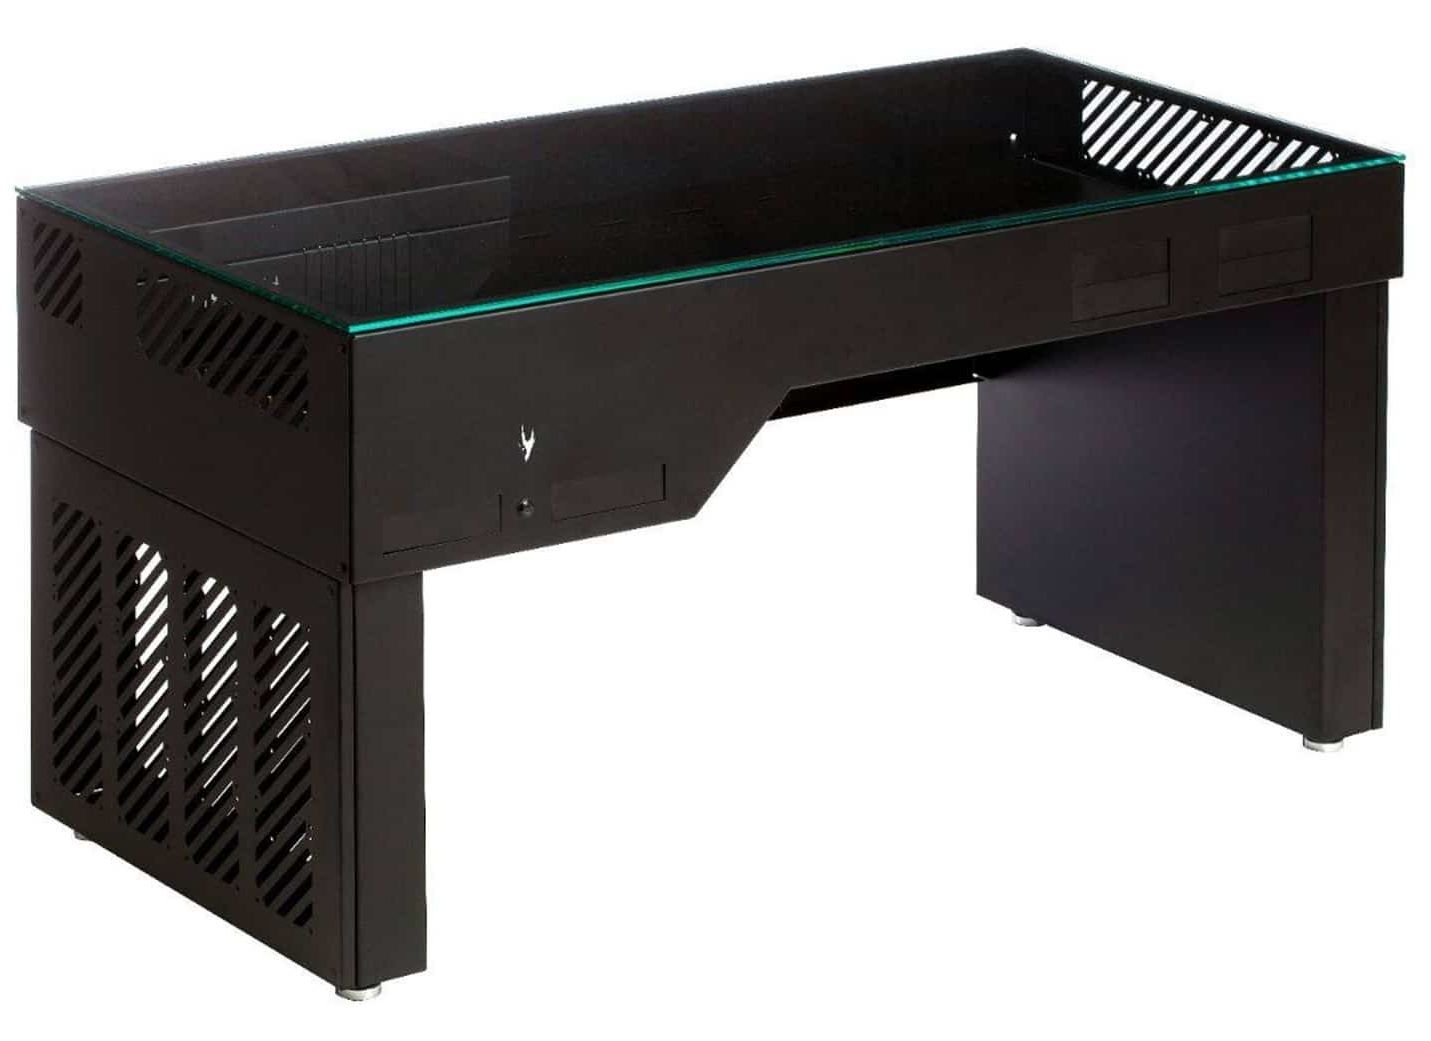 [%best Gaming Desks 2018 [updated] – Buyer's Guide And Reviews Inside Fashionable Gaming Computer Desks|gaming Computer Desks With Regard To 2019 Best Gaming Desks 2018 [updated] – Buyer's Guide And Reviews|recent Gaming Computer Desks With Regard To Best Gaming Desks 2018 [updated] – Buyer's Guide And Reviews|most Current Best Gaming Desks 2018 [updated] – Buyer's Guide And Reviews Within Gaming Computer Desks%] (View 2 of 20)